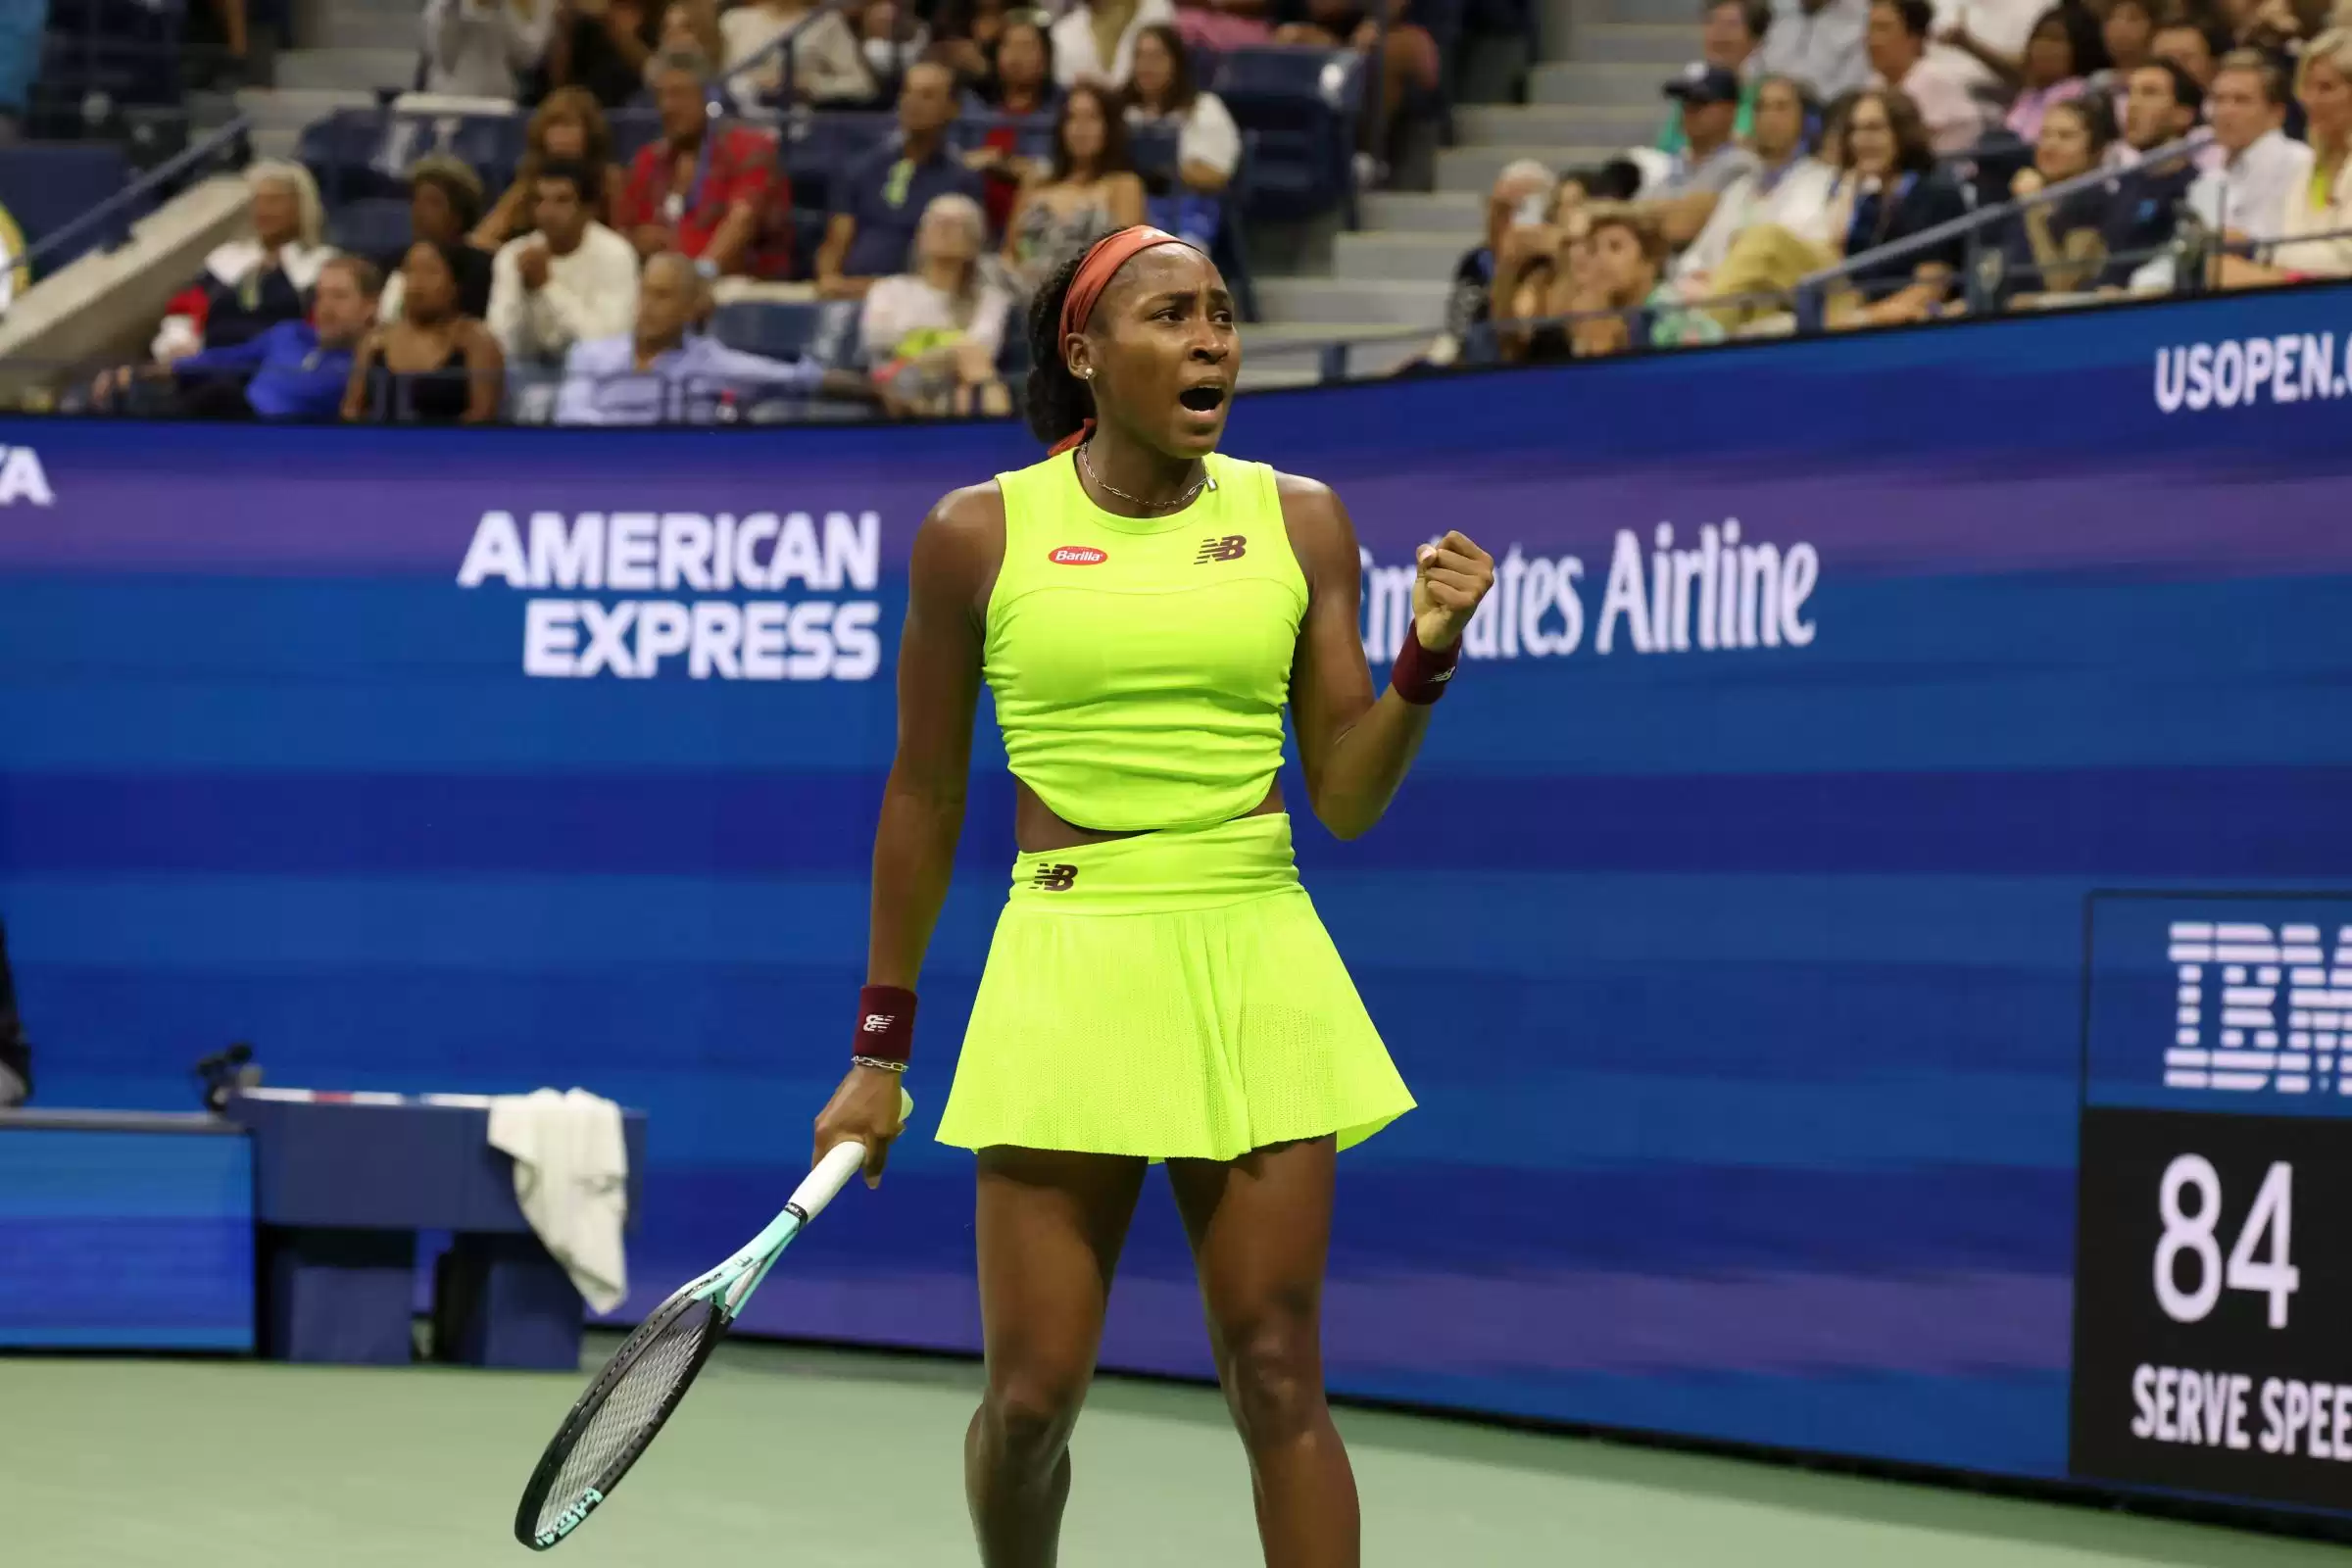 Coco Gauff secures US Open first round victory after a slight delay